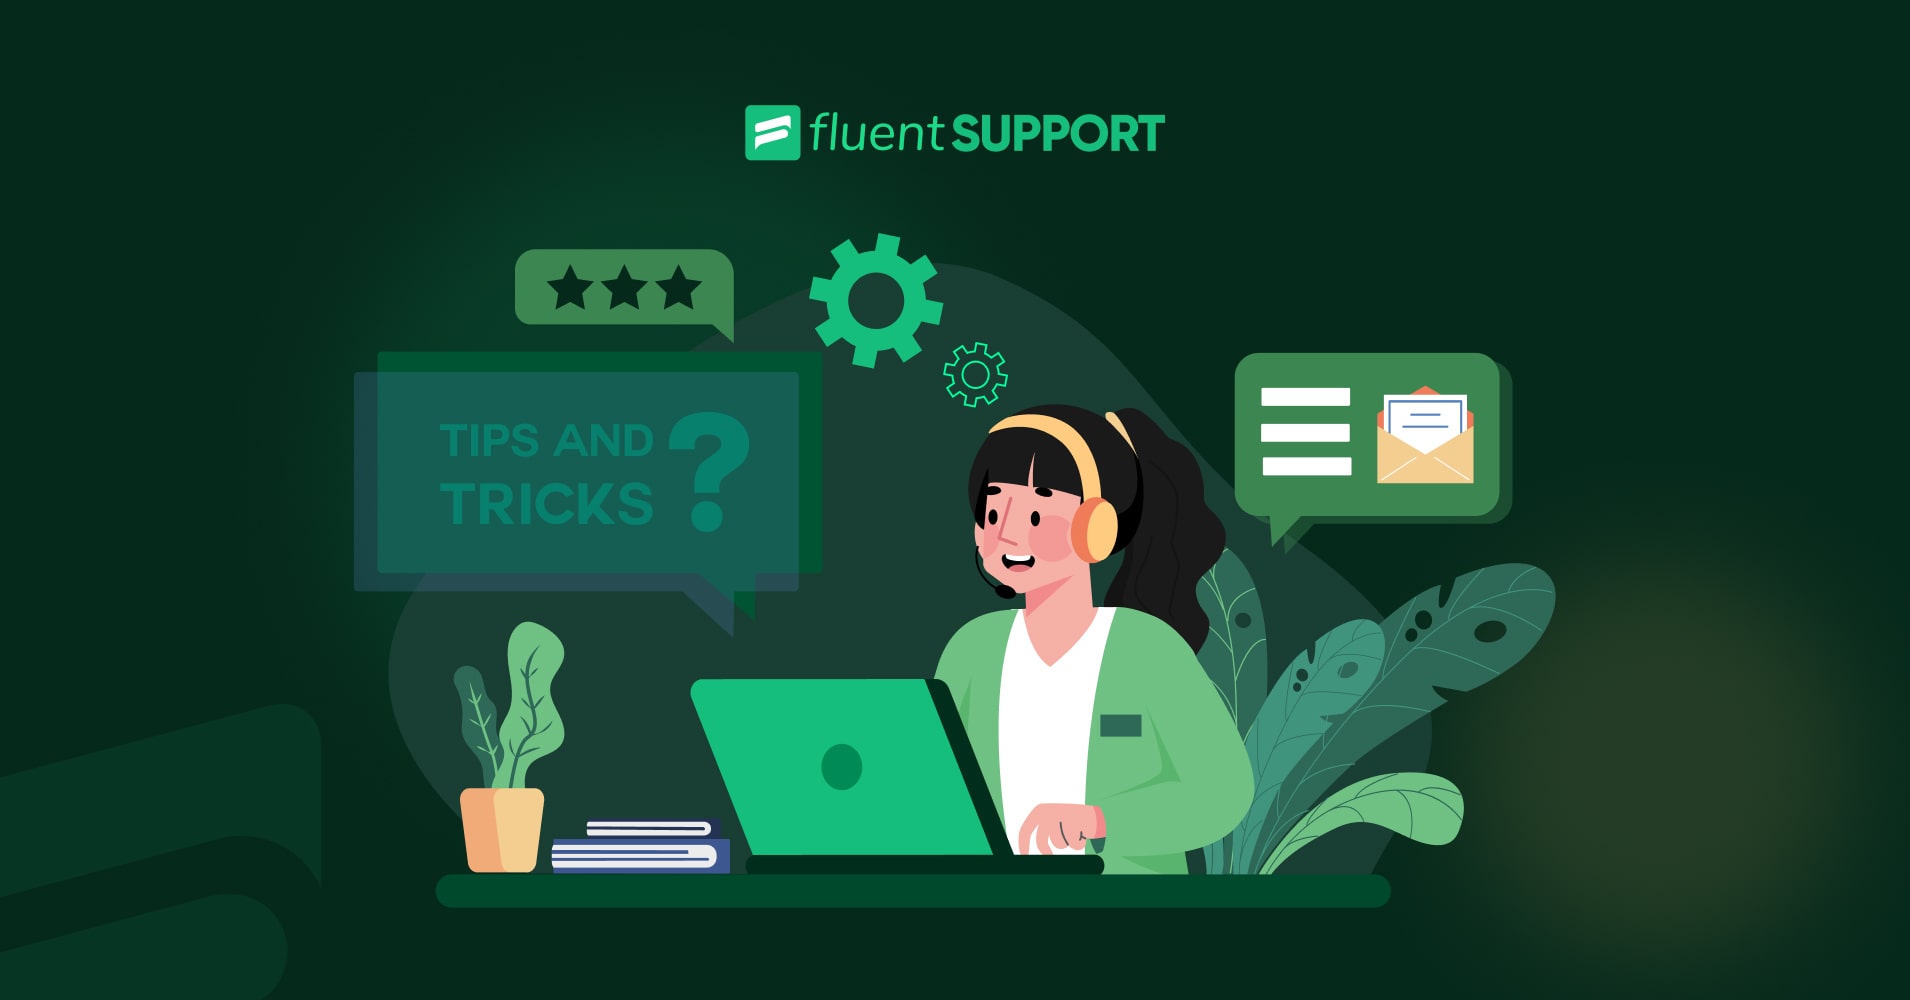 How do you motivate your team of customer support agent